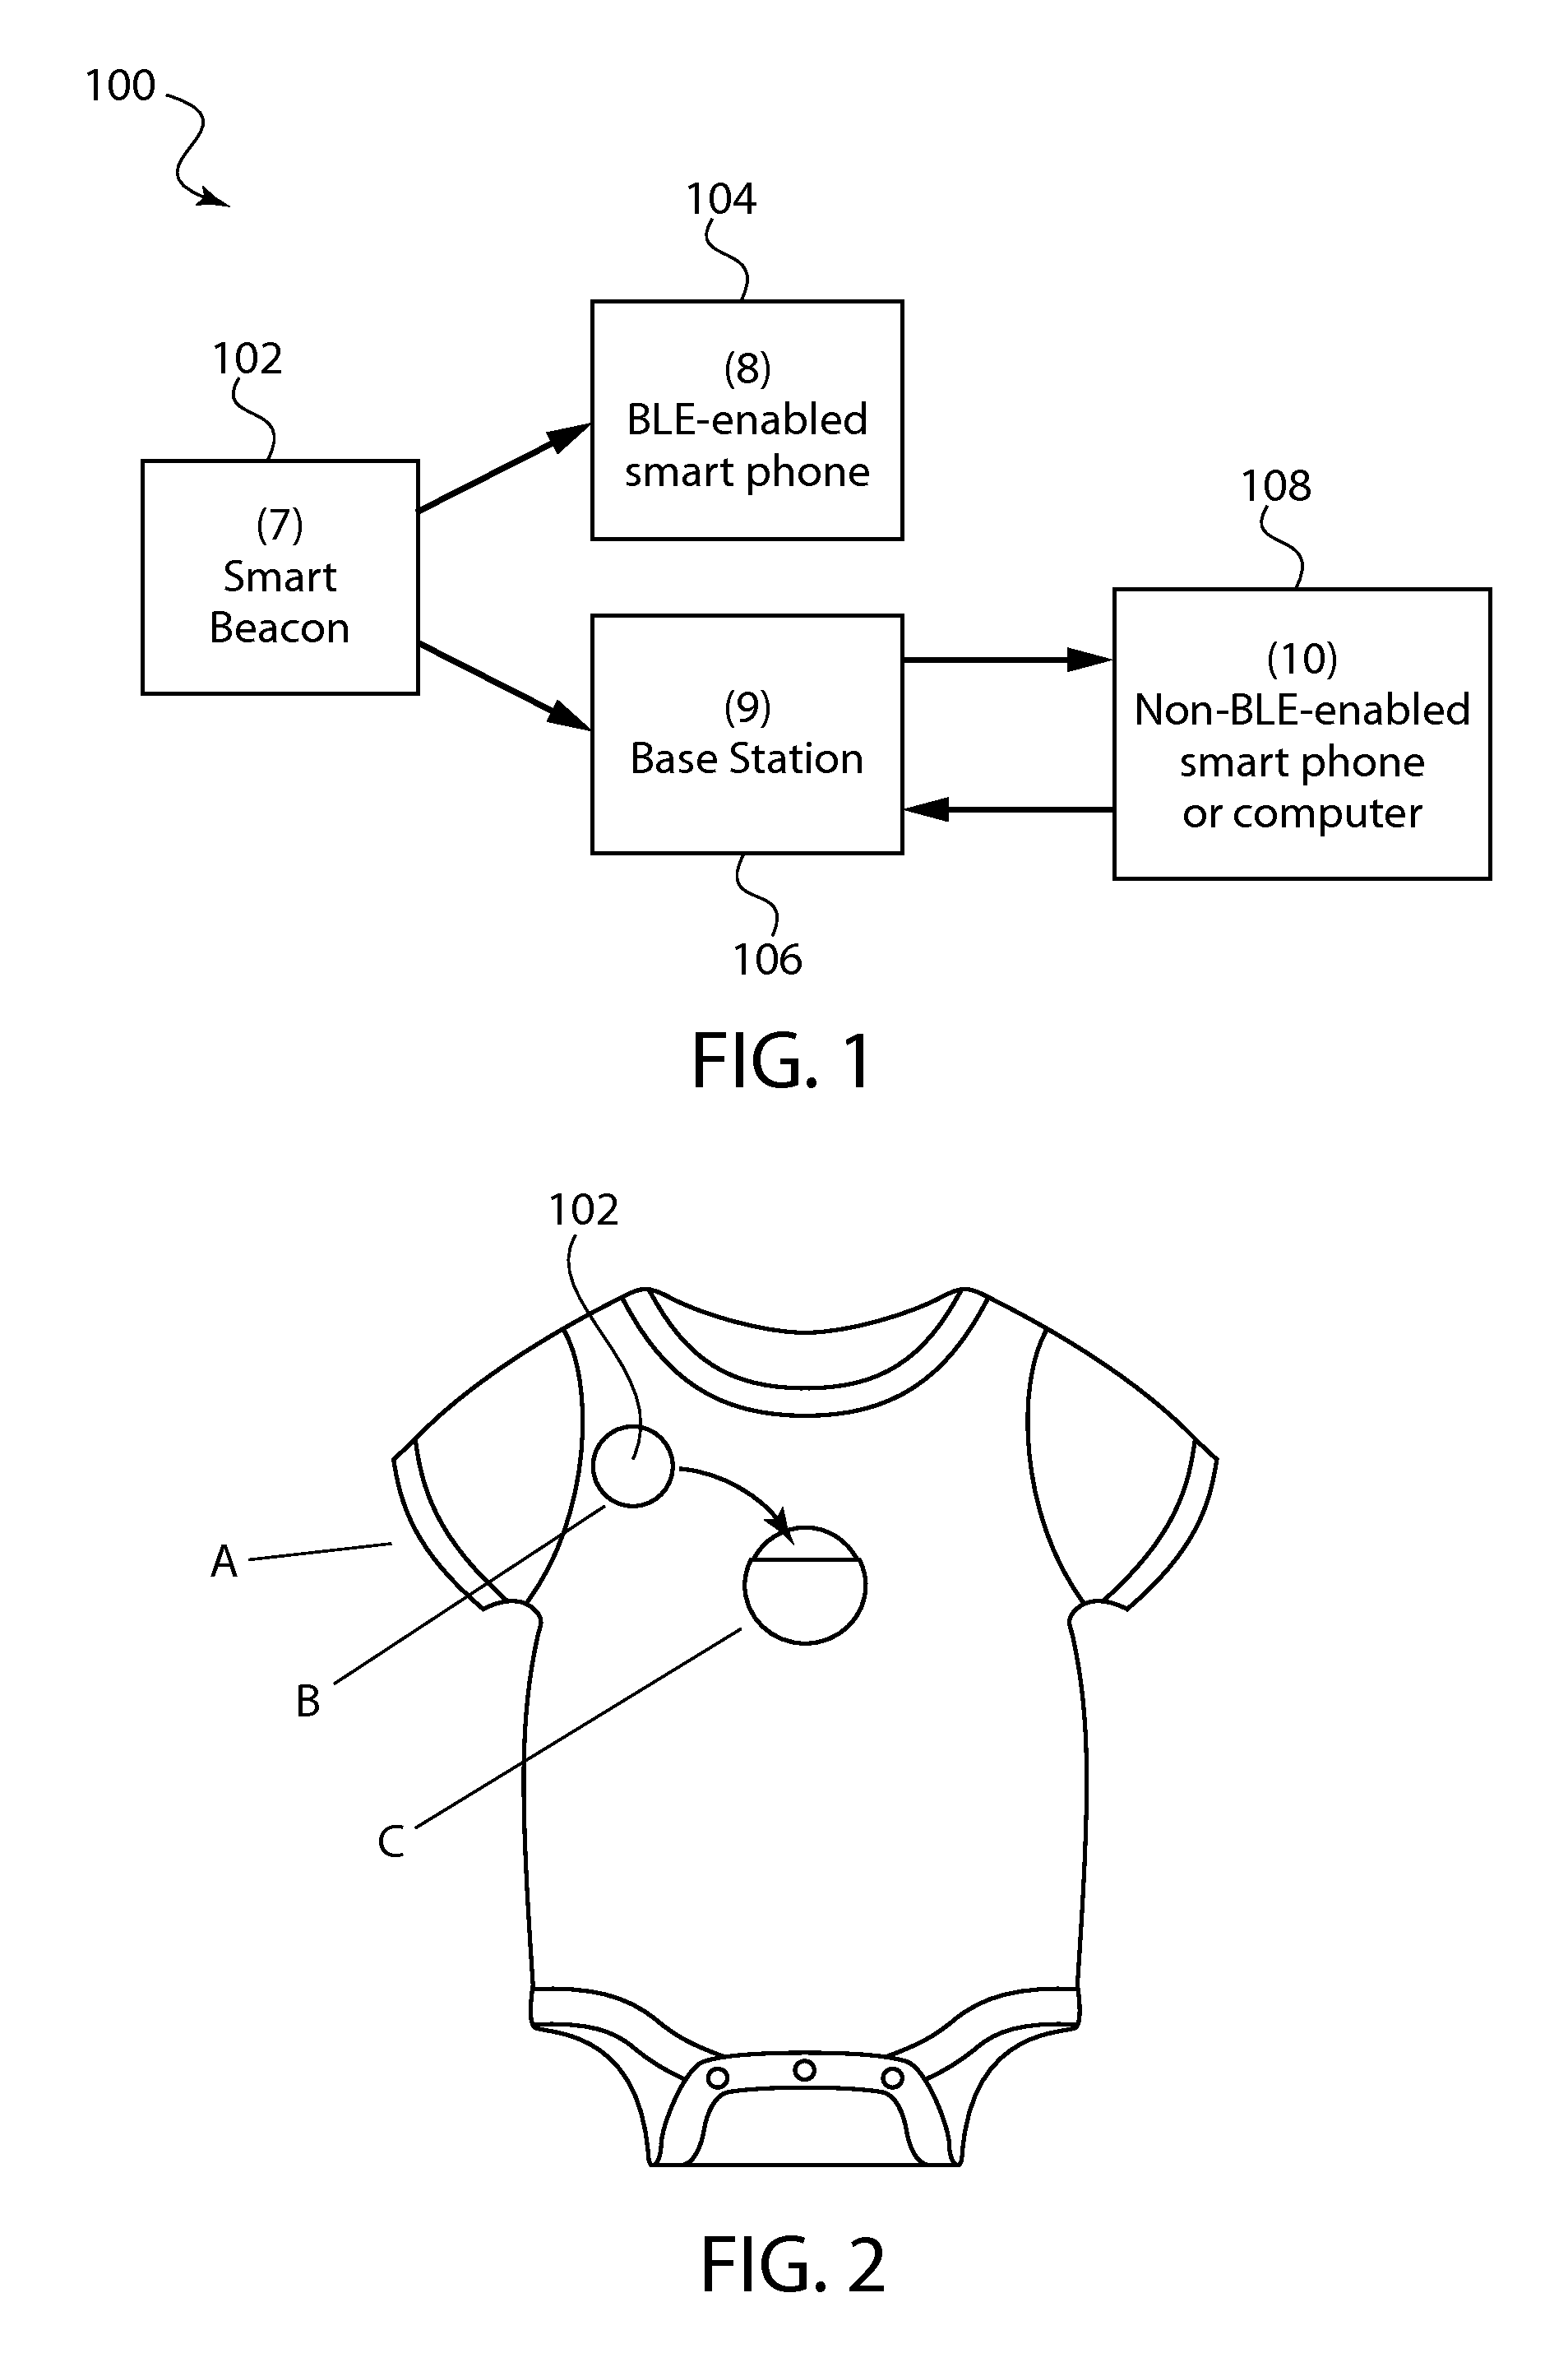 Subject motion monitoring, temperature monitoring, data gathering and analytics system and method